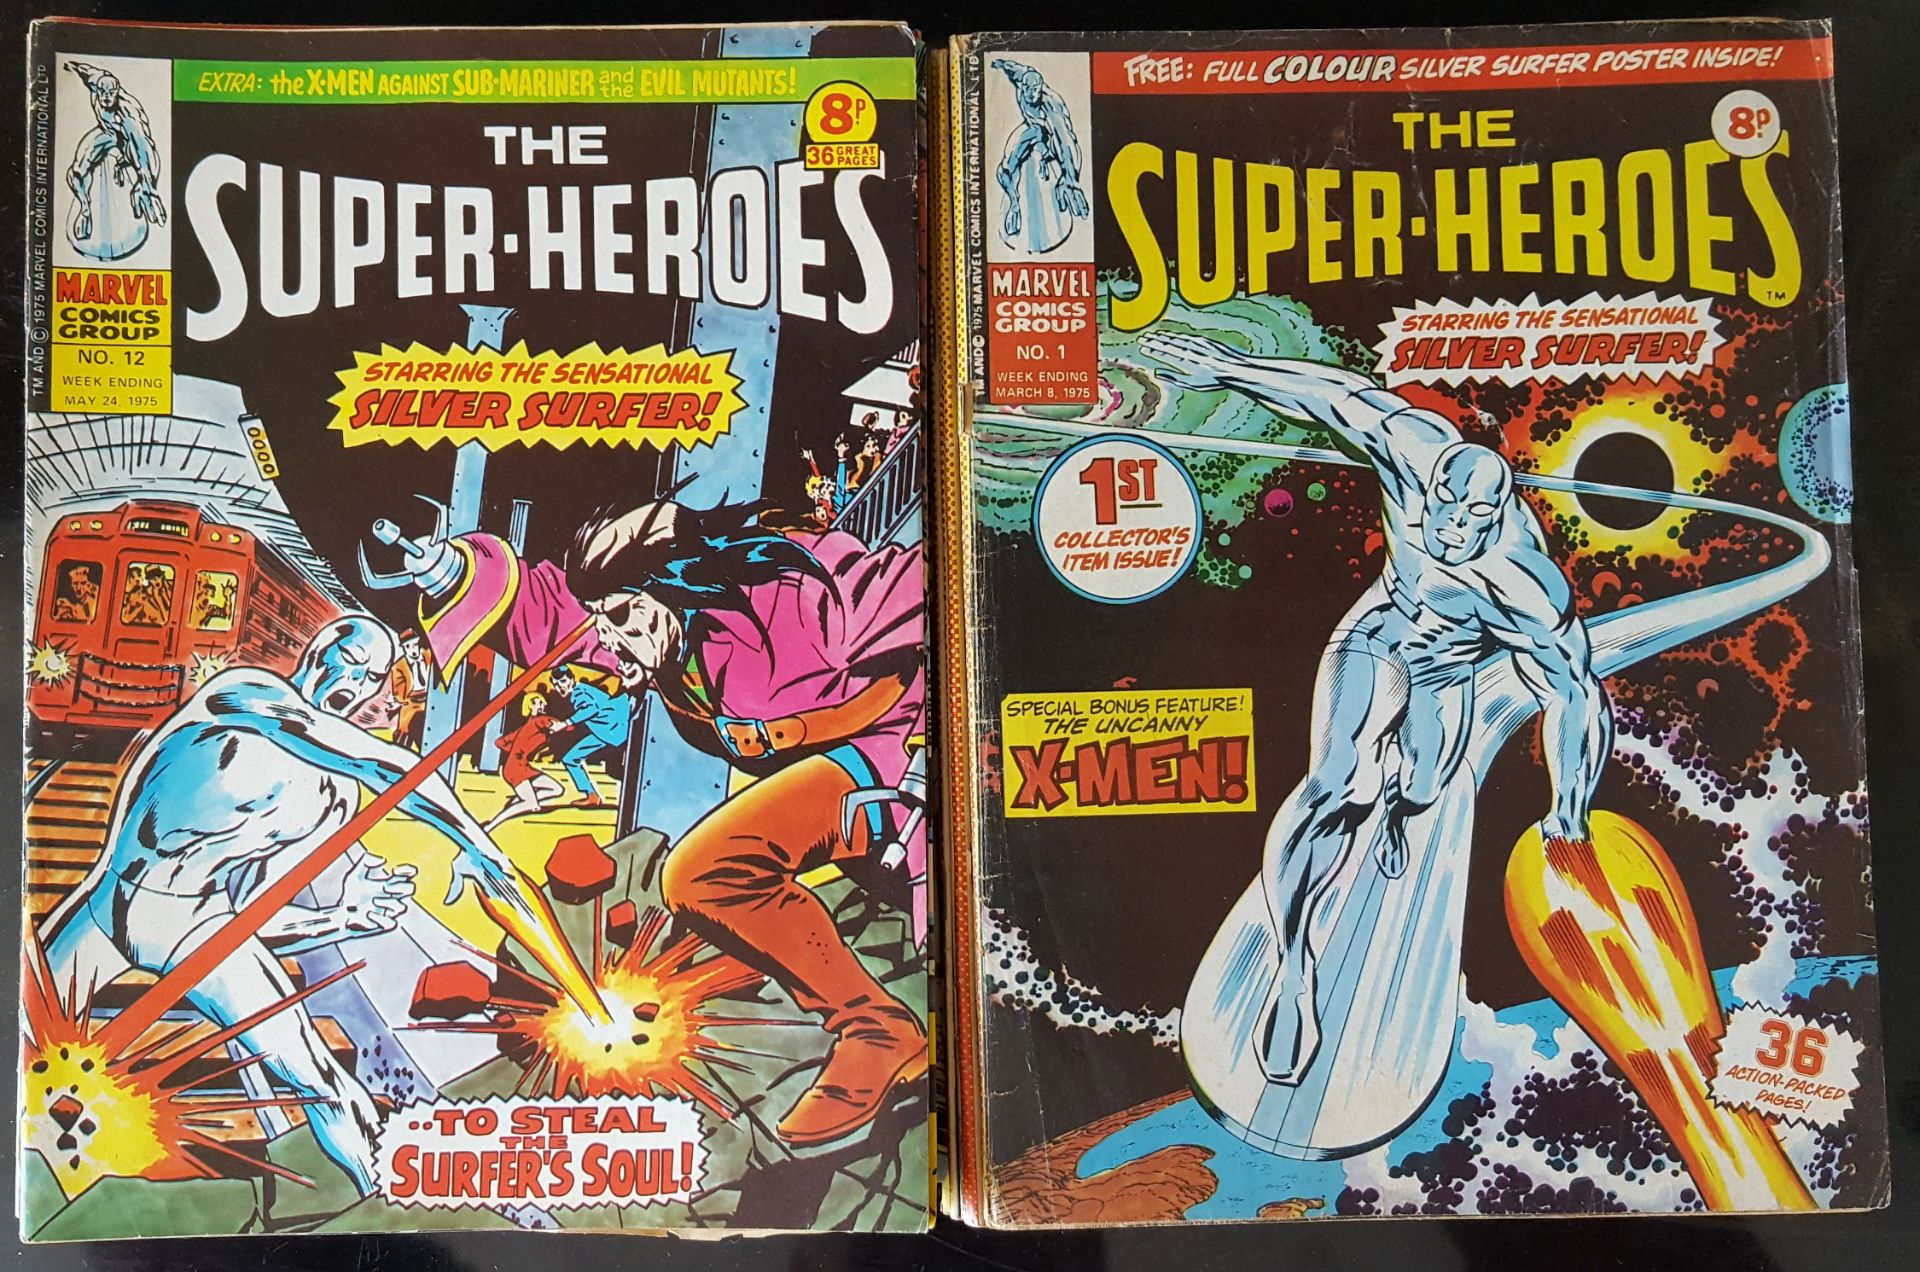 25 x Marvel Comics The Super Heroes Series No. 1-25 printed 1975 Numer 1 issue with original insert